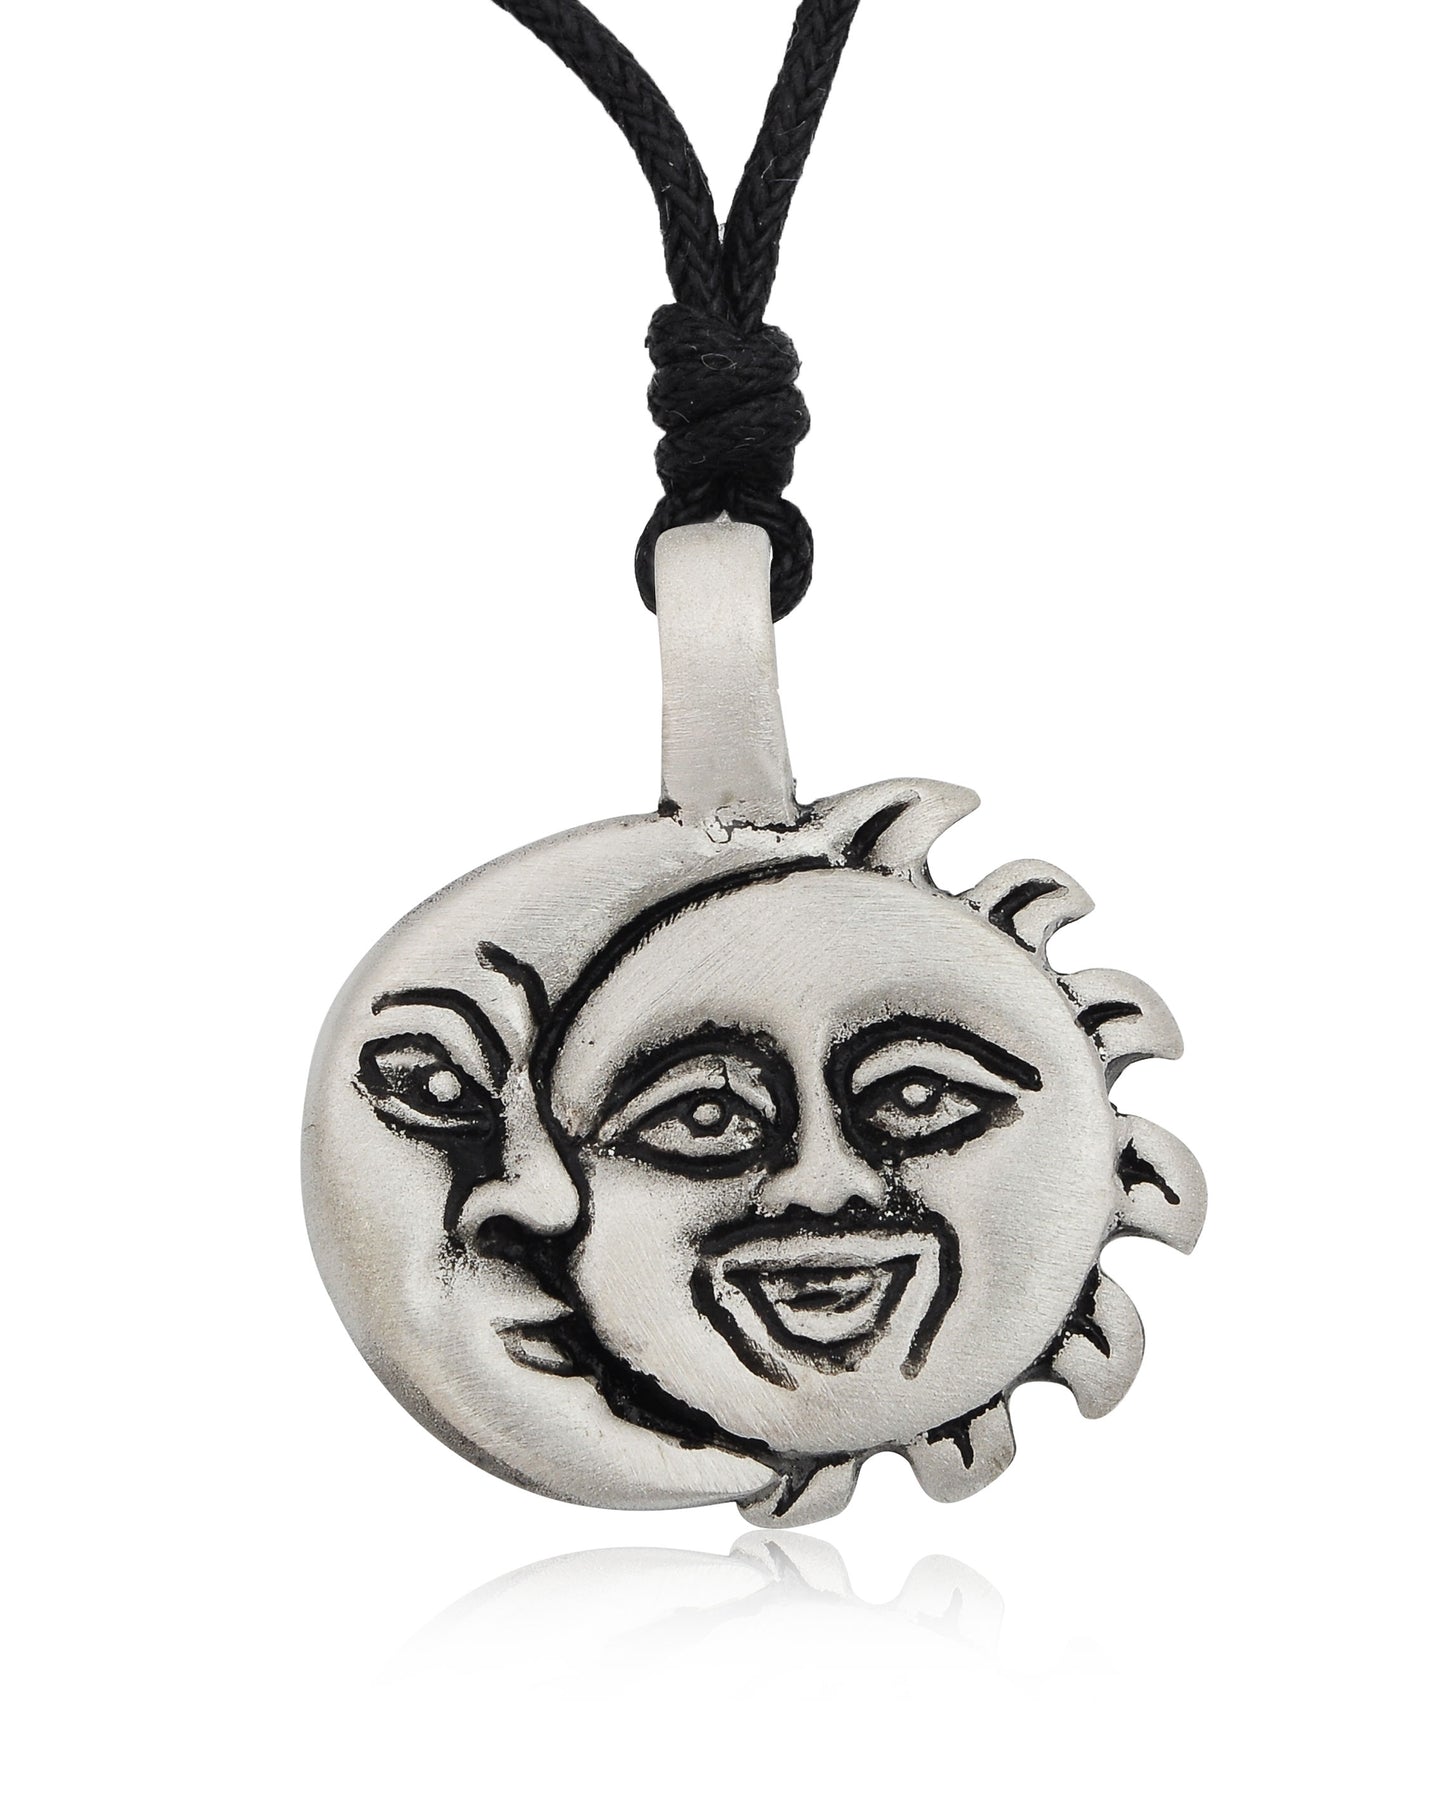 Sun and Moon Ying Yang Silver Pewter Charm Necklace Pendant Jewelry